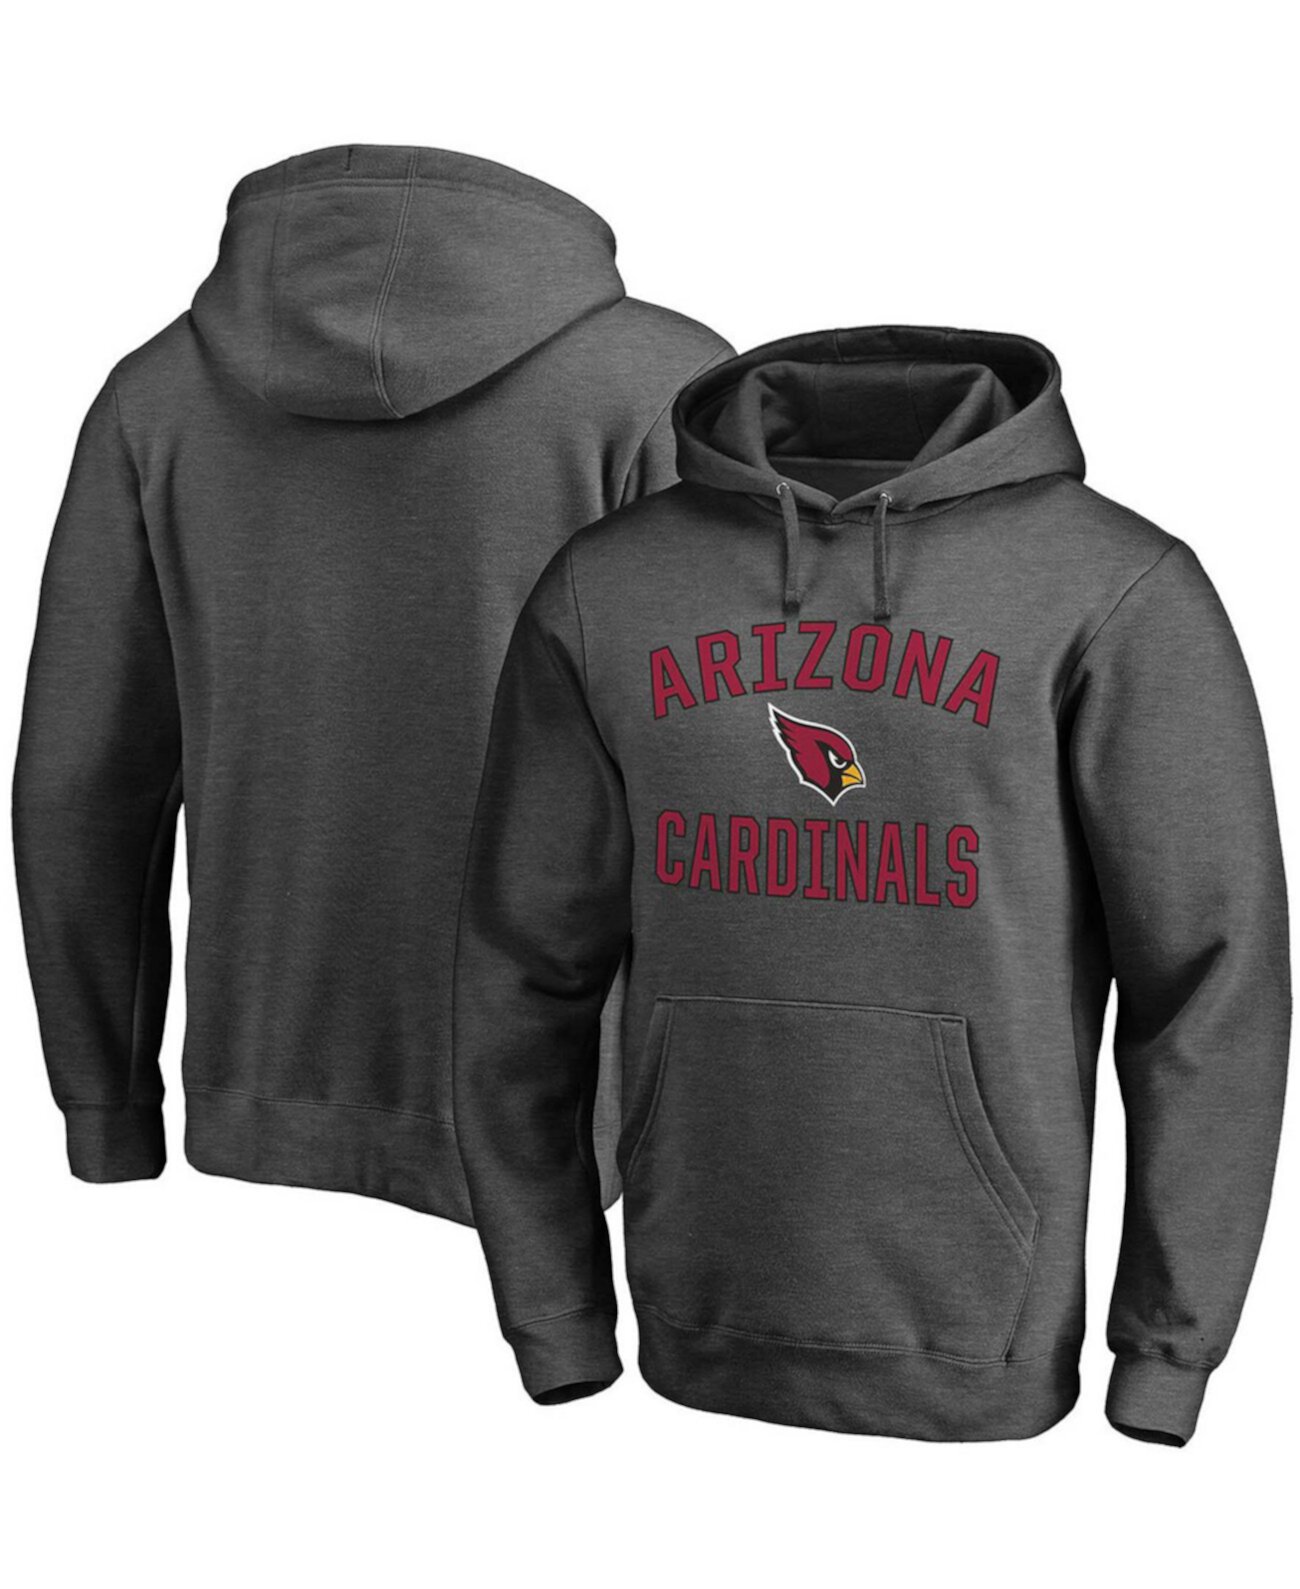 Men's Heathered Charcoal Arizona Cardinals Victory Arch Team Pullover Hoodie Fanatics